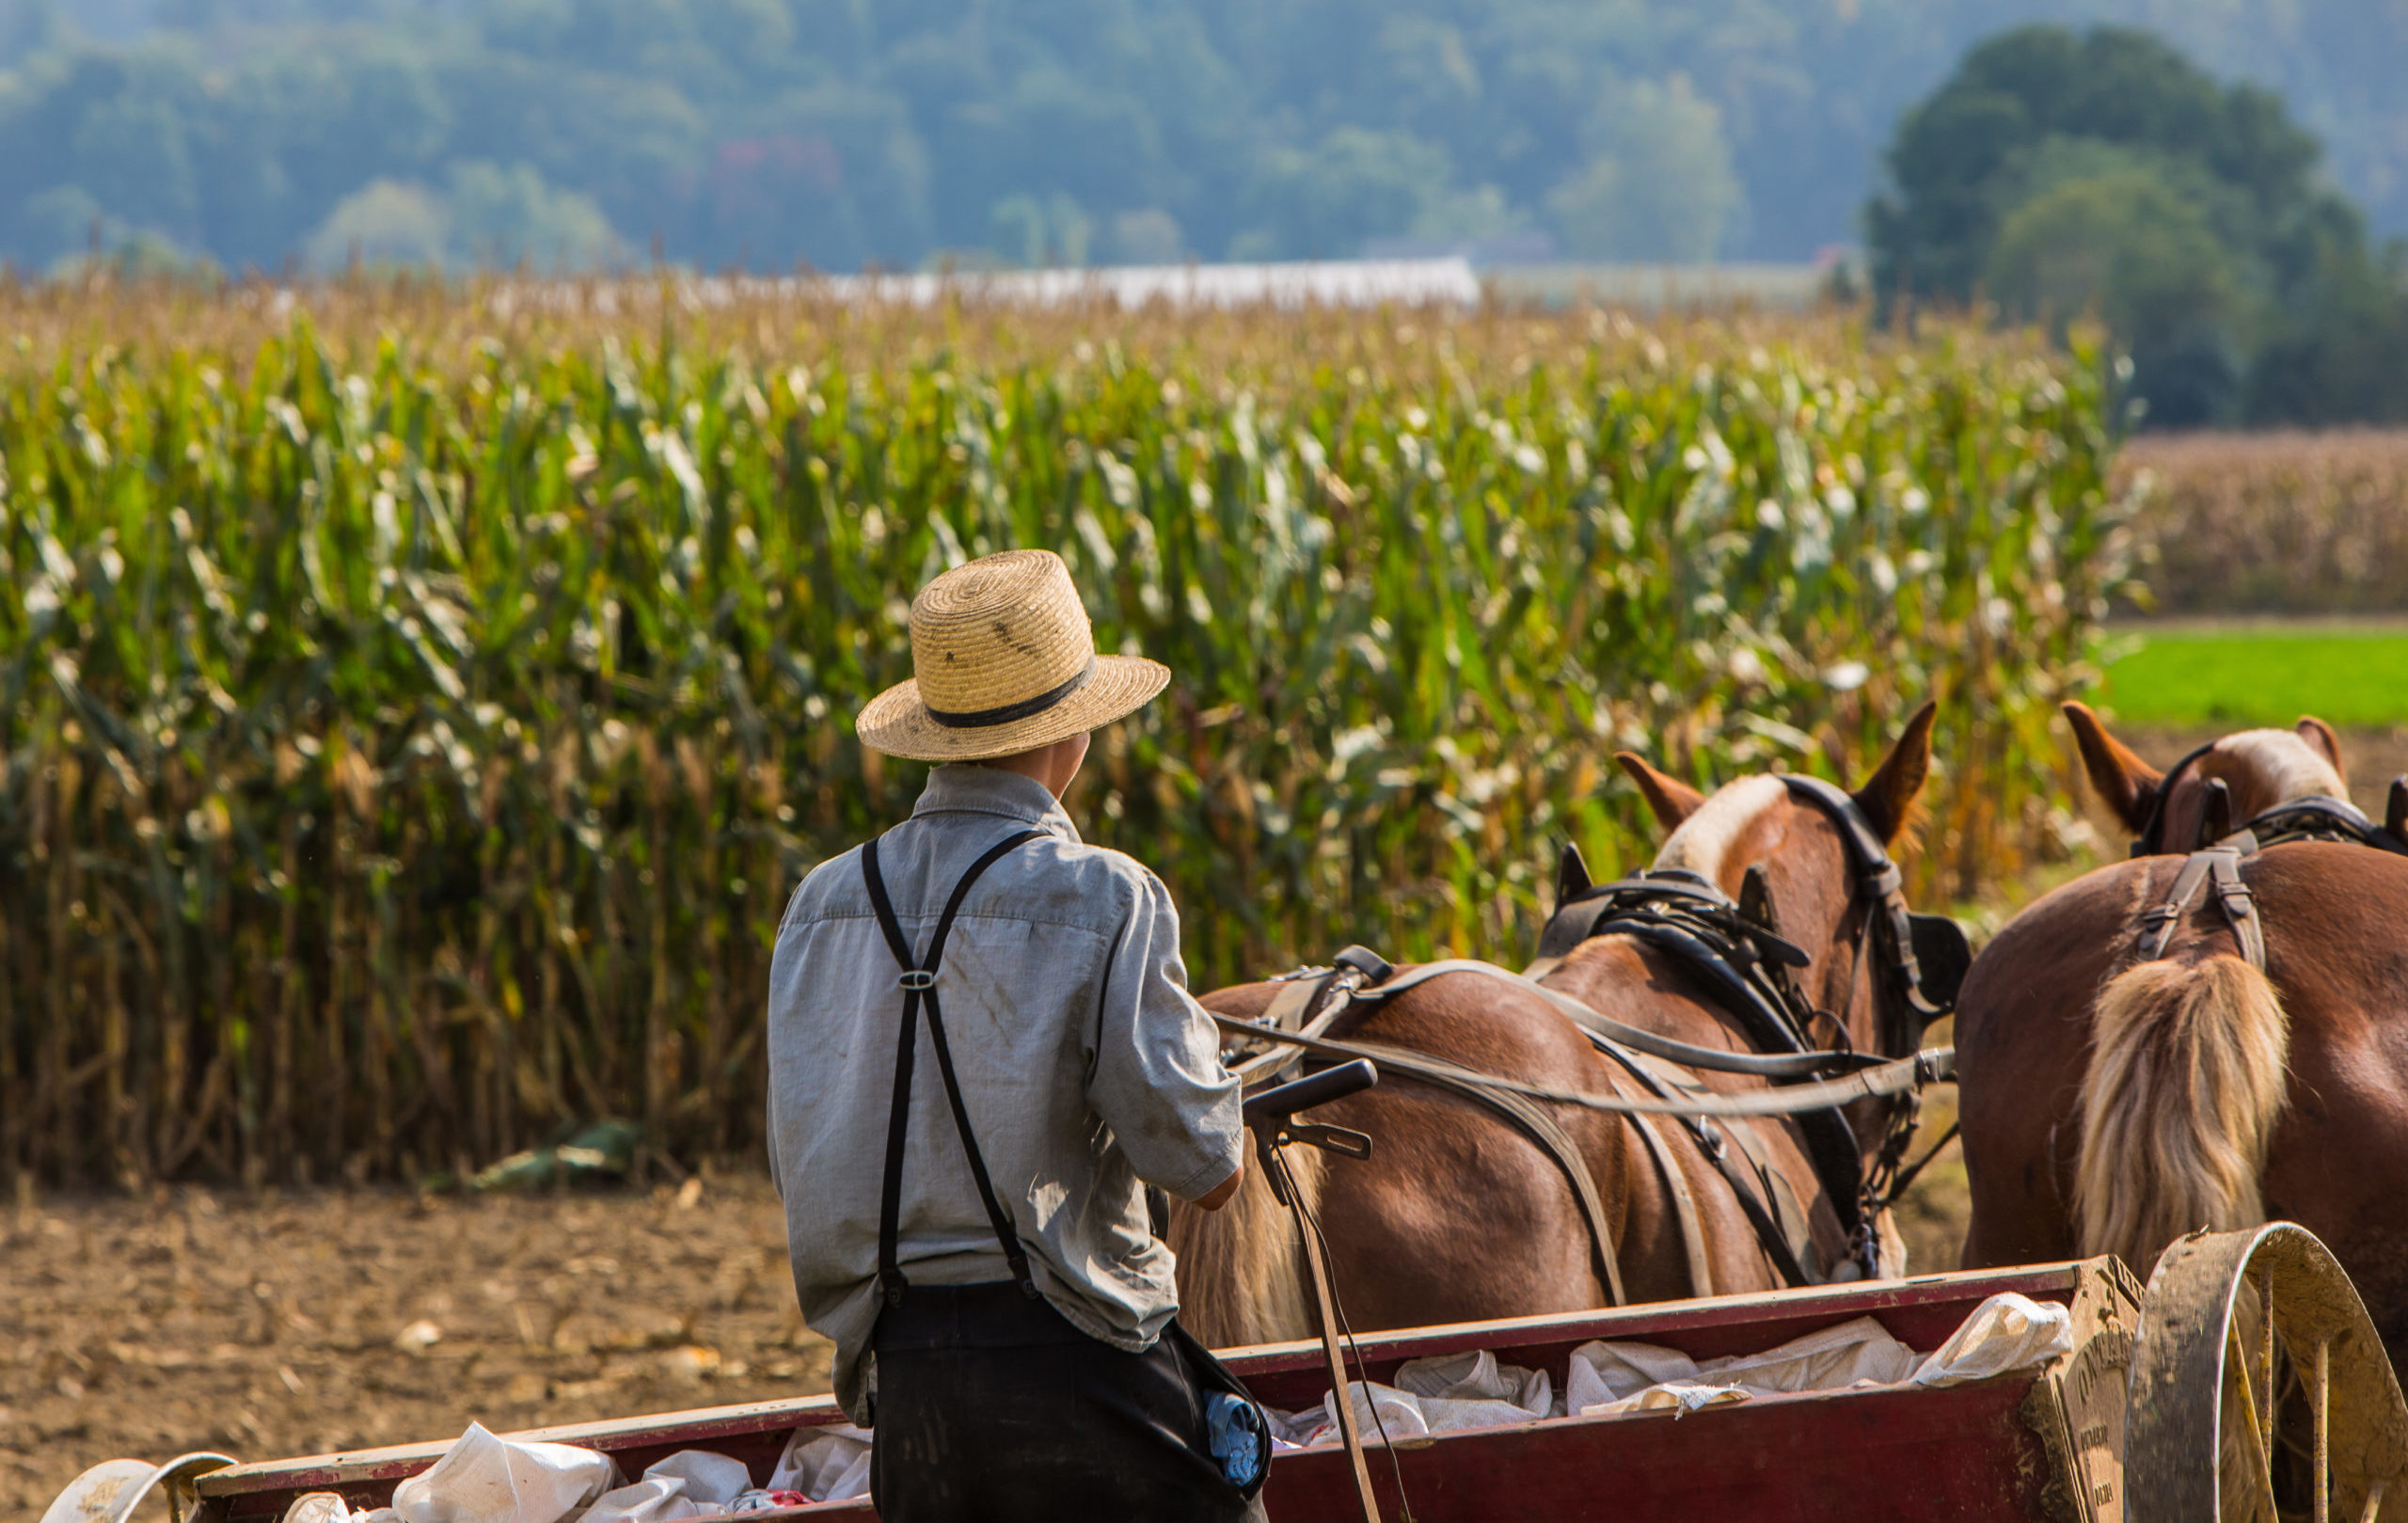 Young,Amish,Farmer,Behind,Horses,Sowing,A,Field,During,The